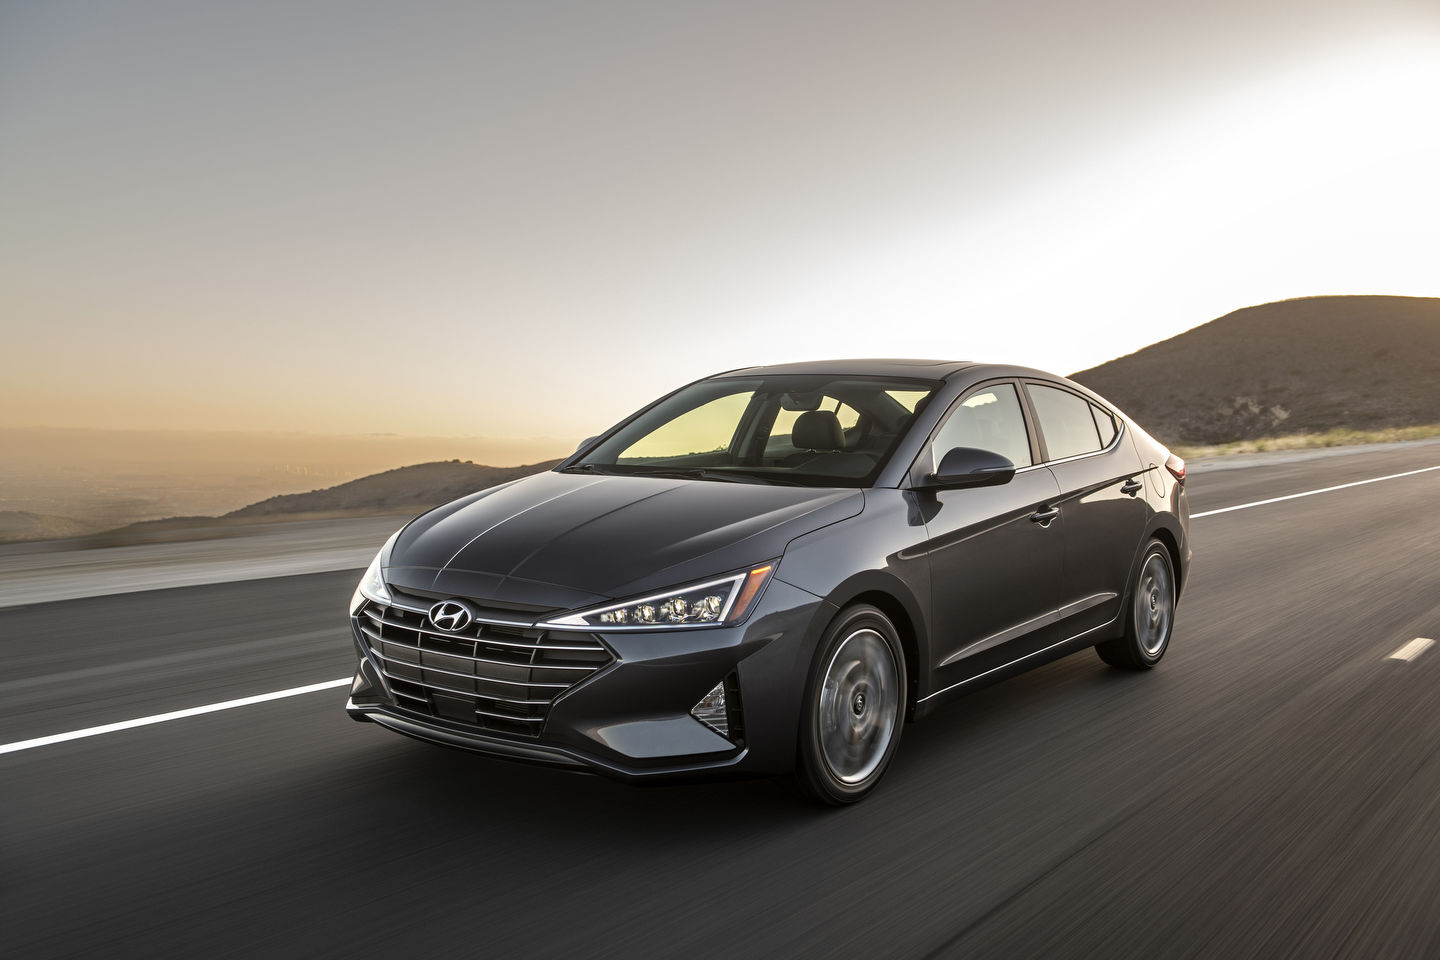 A look at how pre-owned Hyundai Elantra models stand out